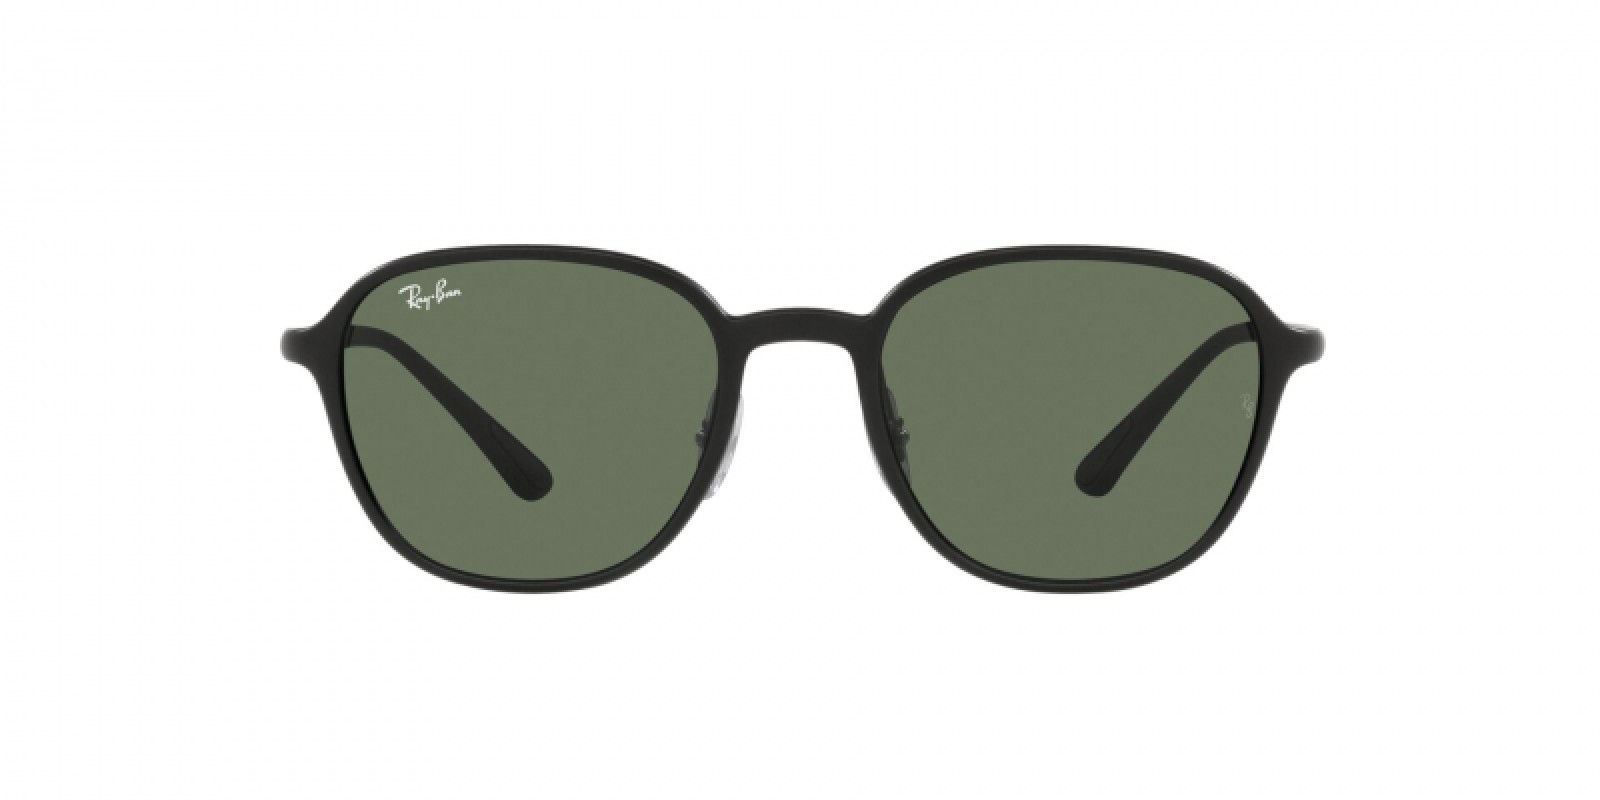 Ray-Ban RB4341 601S71